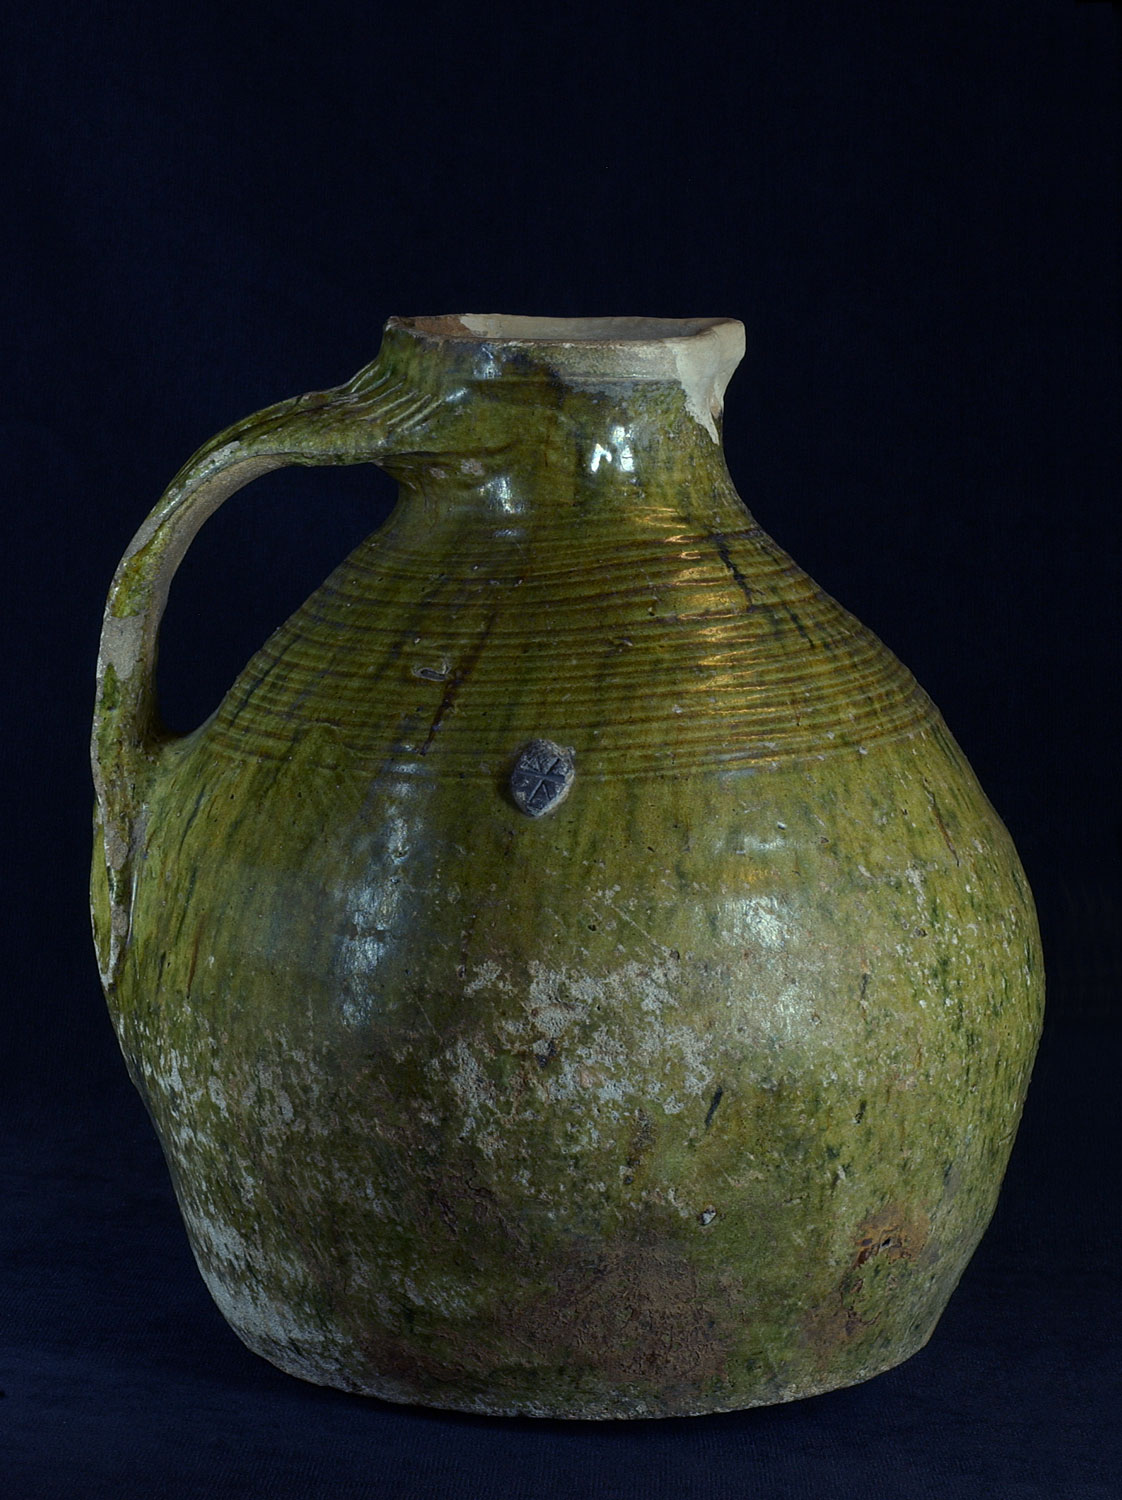 An image of an old pot, most likely used by the early river settlers